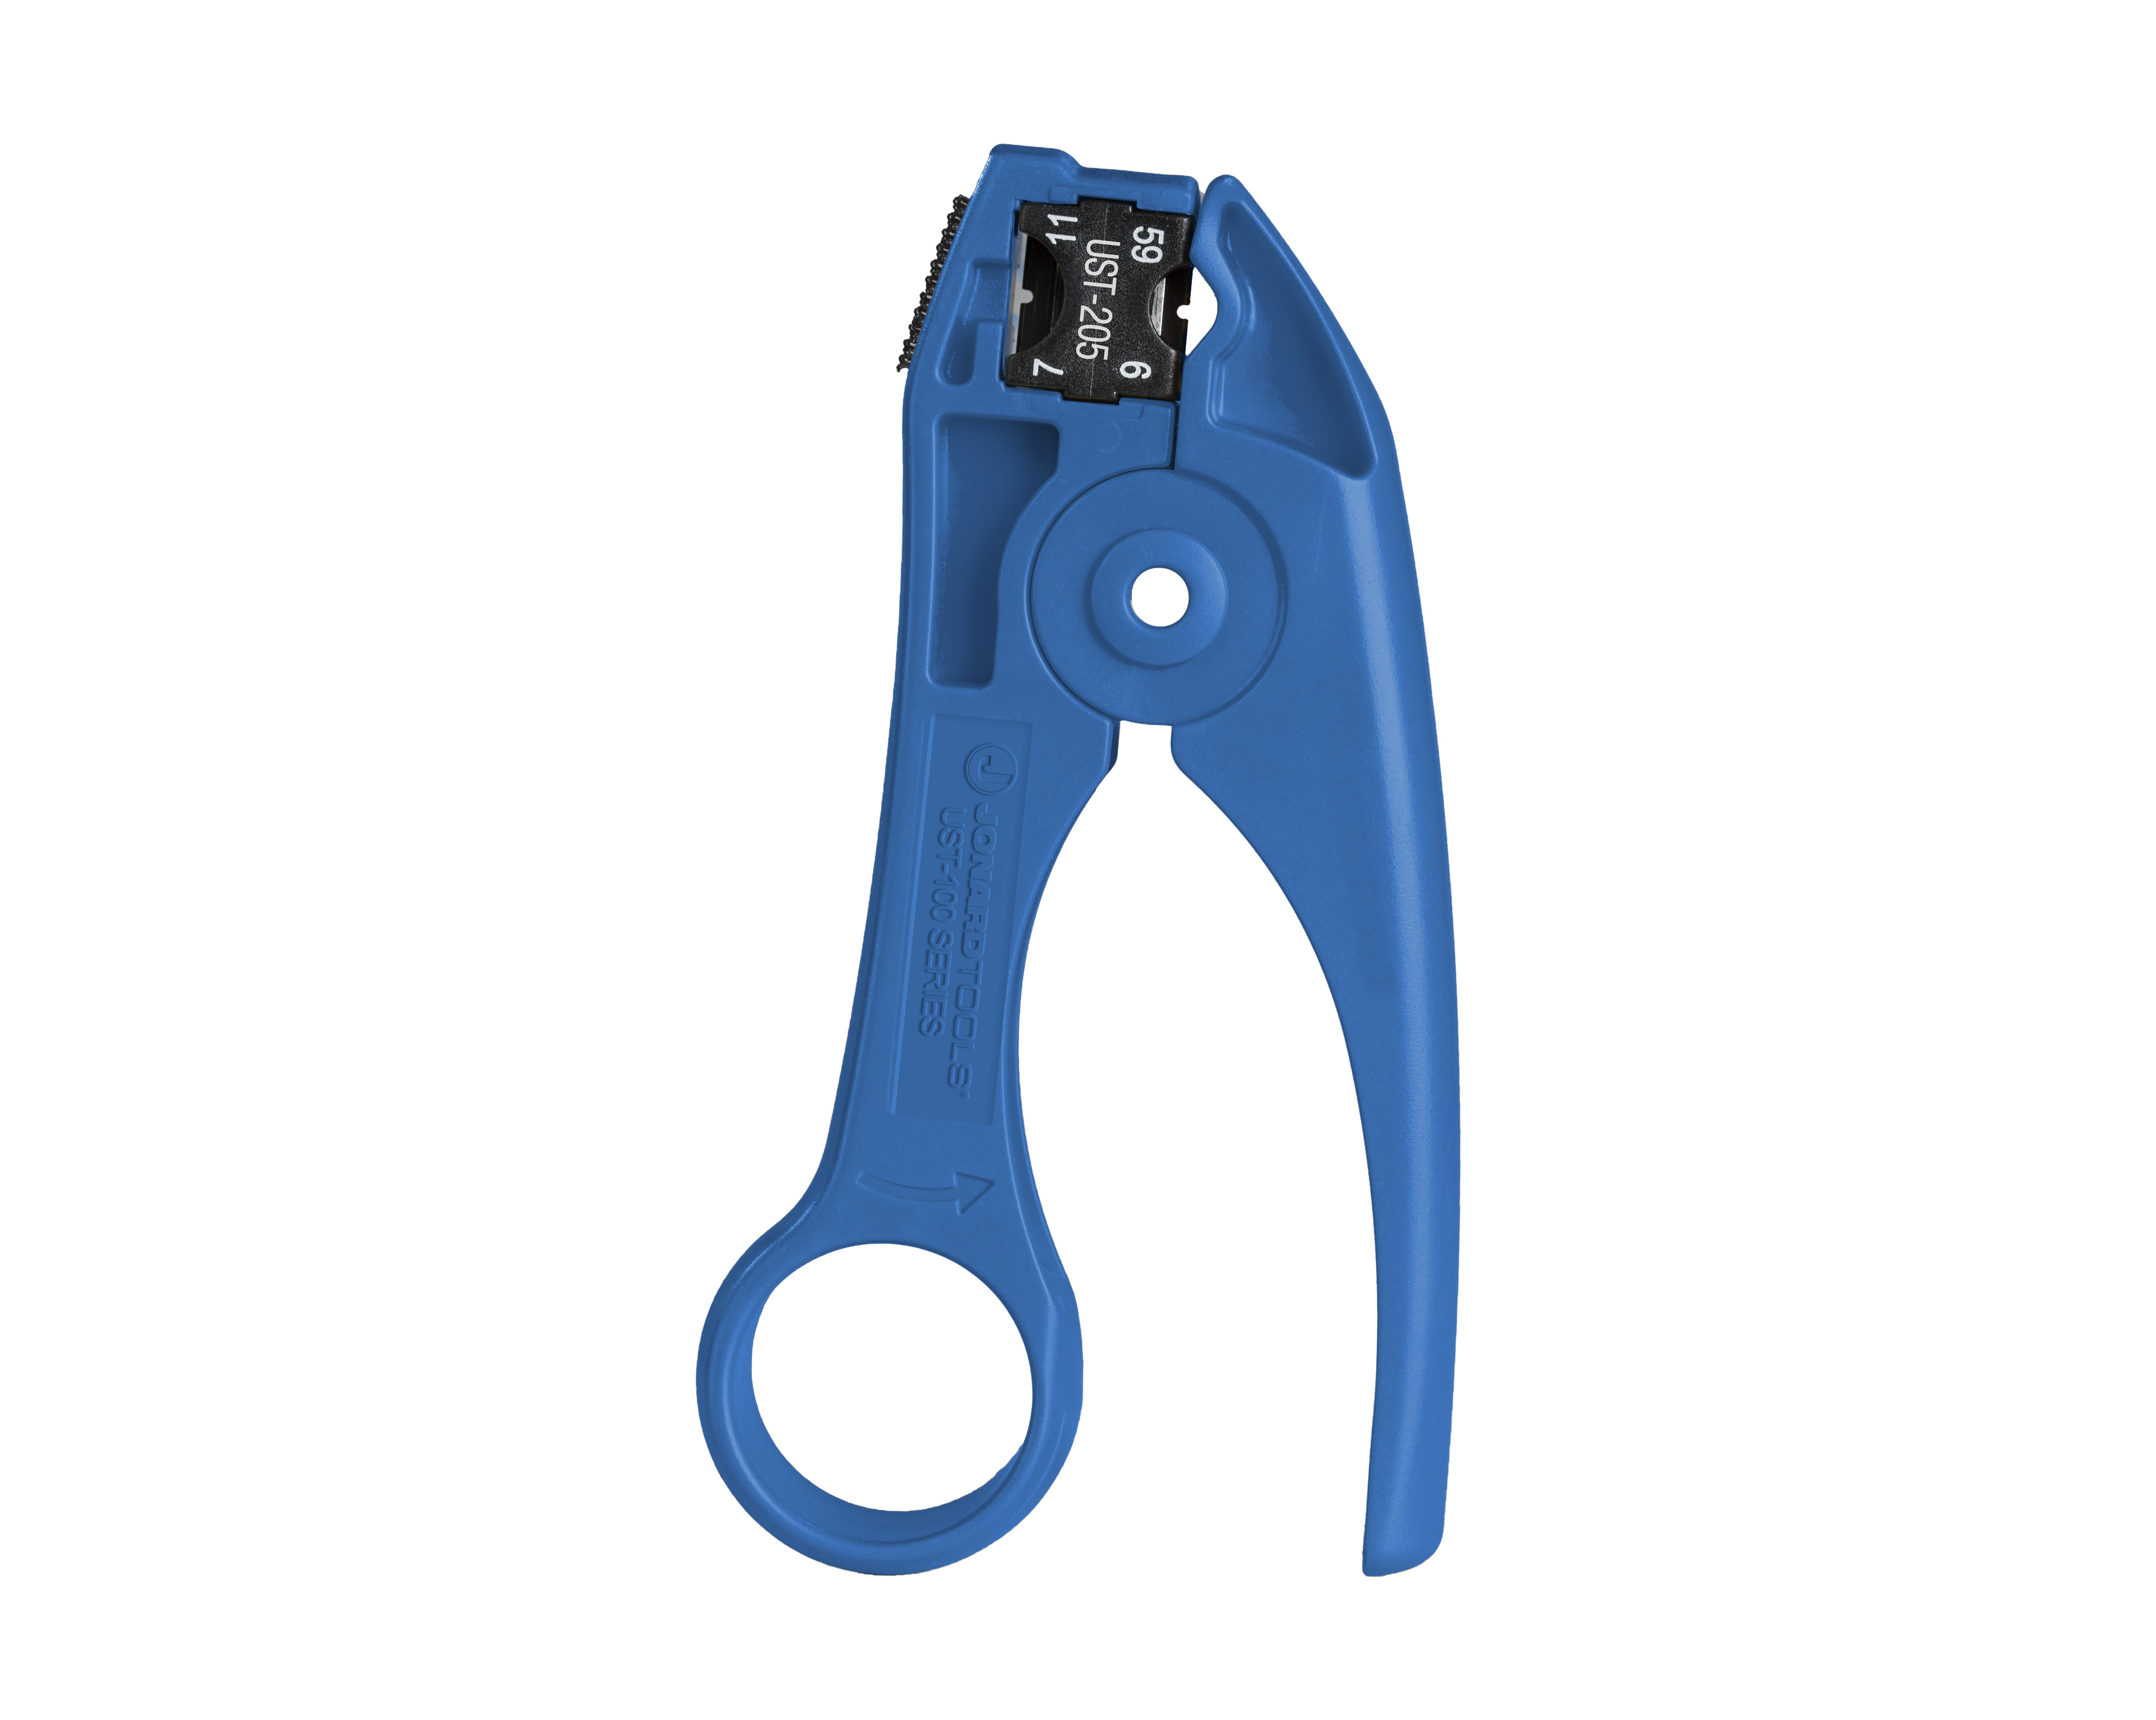 Speedy Coax Coaxial Cable Cutter Stripper Tool for RG6 RG59 RG7 RG11 Cat5/6Bju 